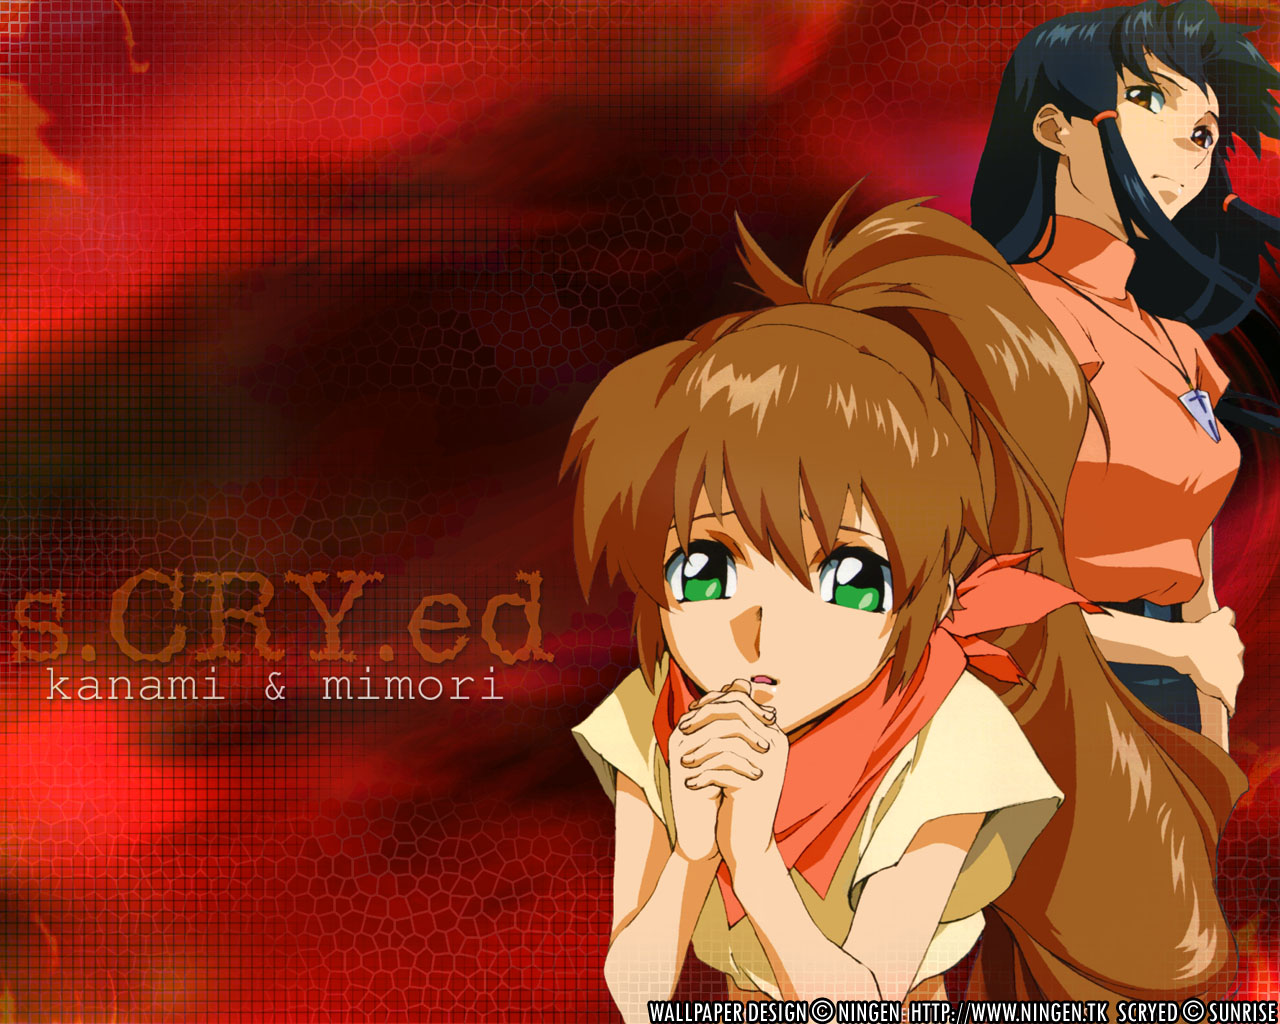 Download High quality Scryed wallpaper / Anime / 1280x1024